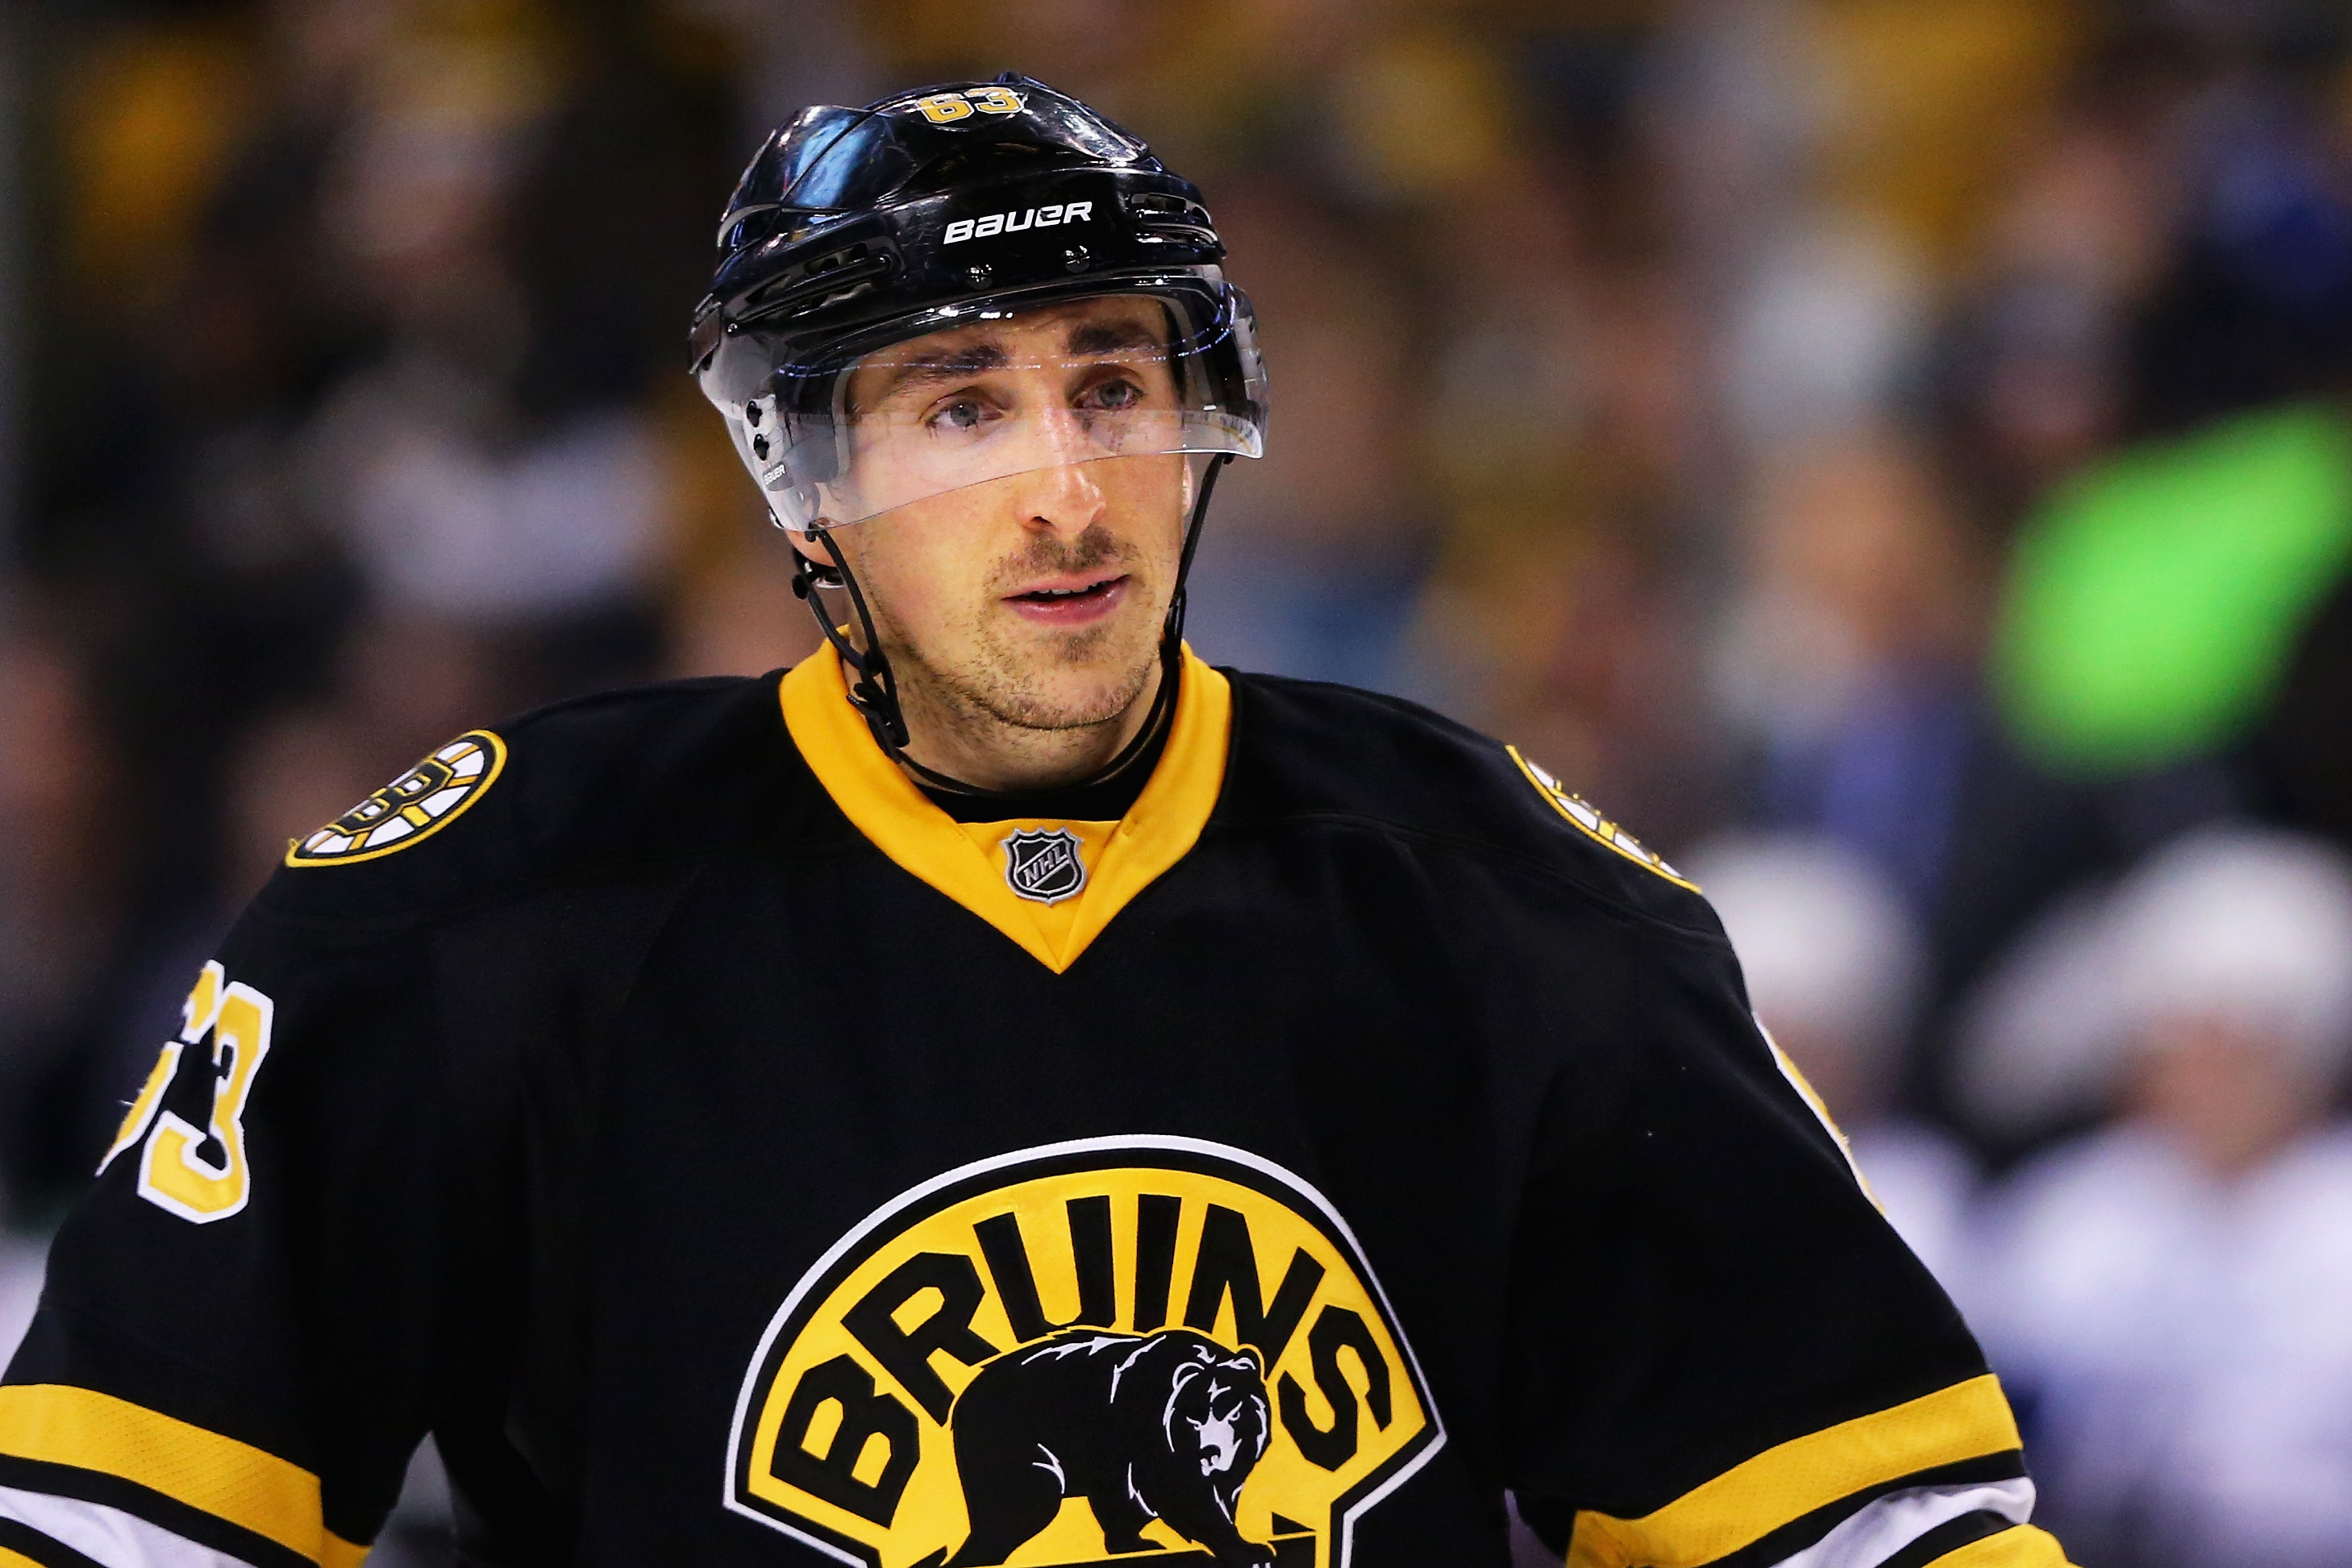 Brad Marchand had a hat trick, here are three excerpts from his Wikipedia page